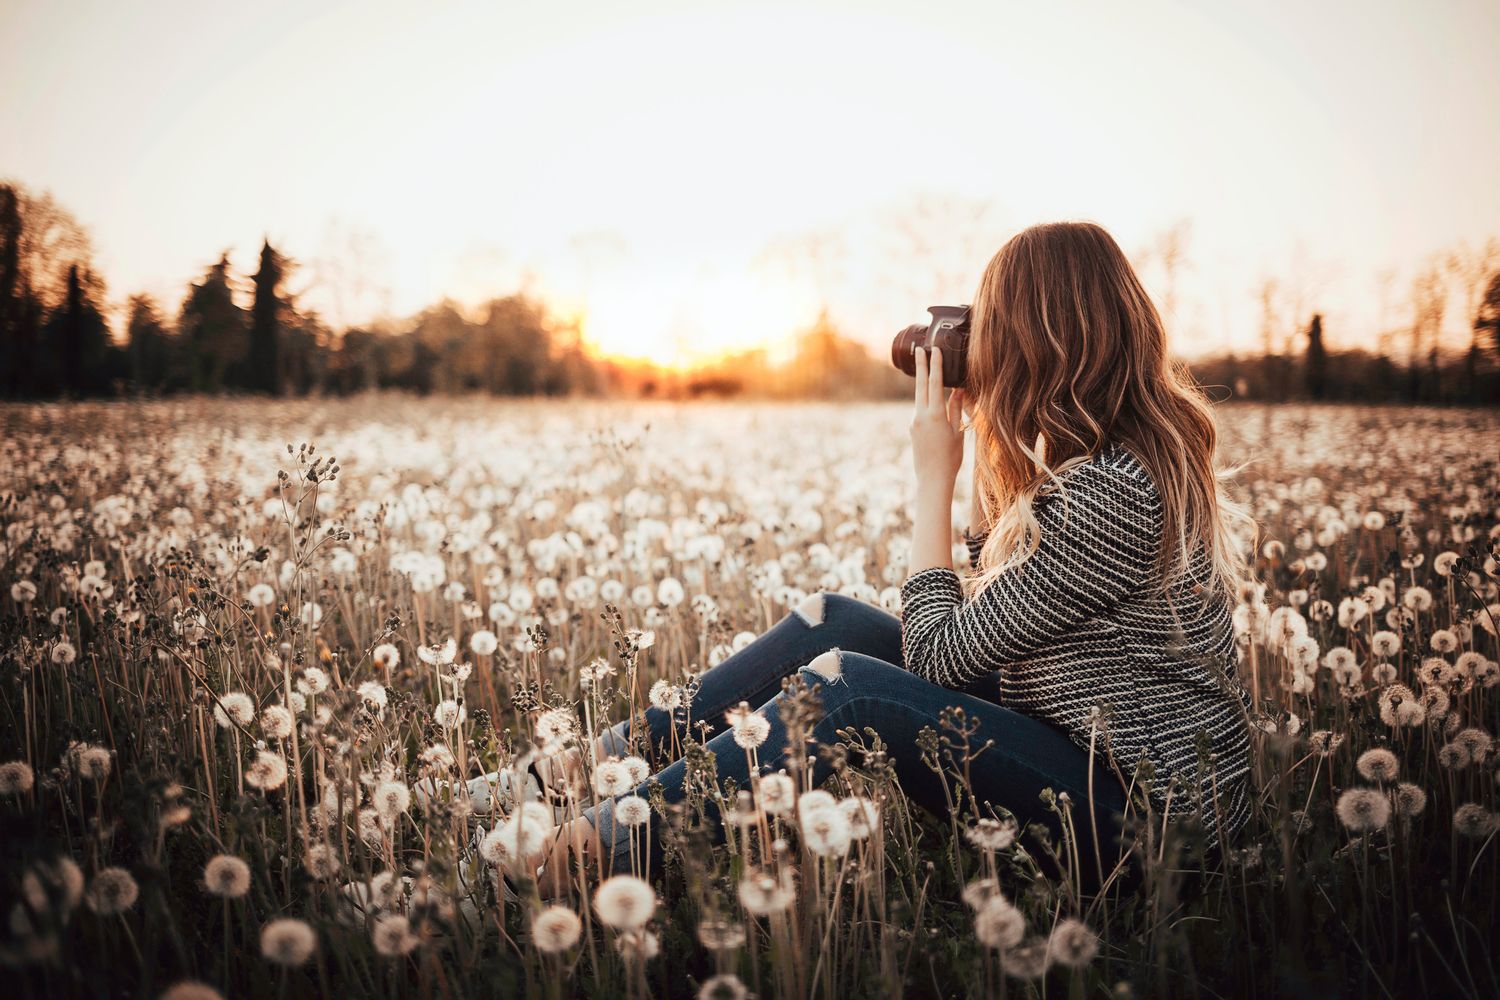 Photographer in a Field